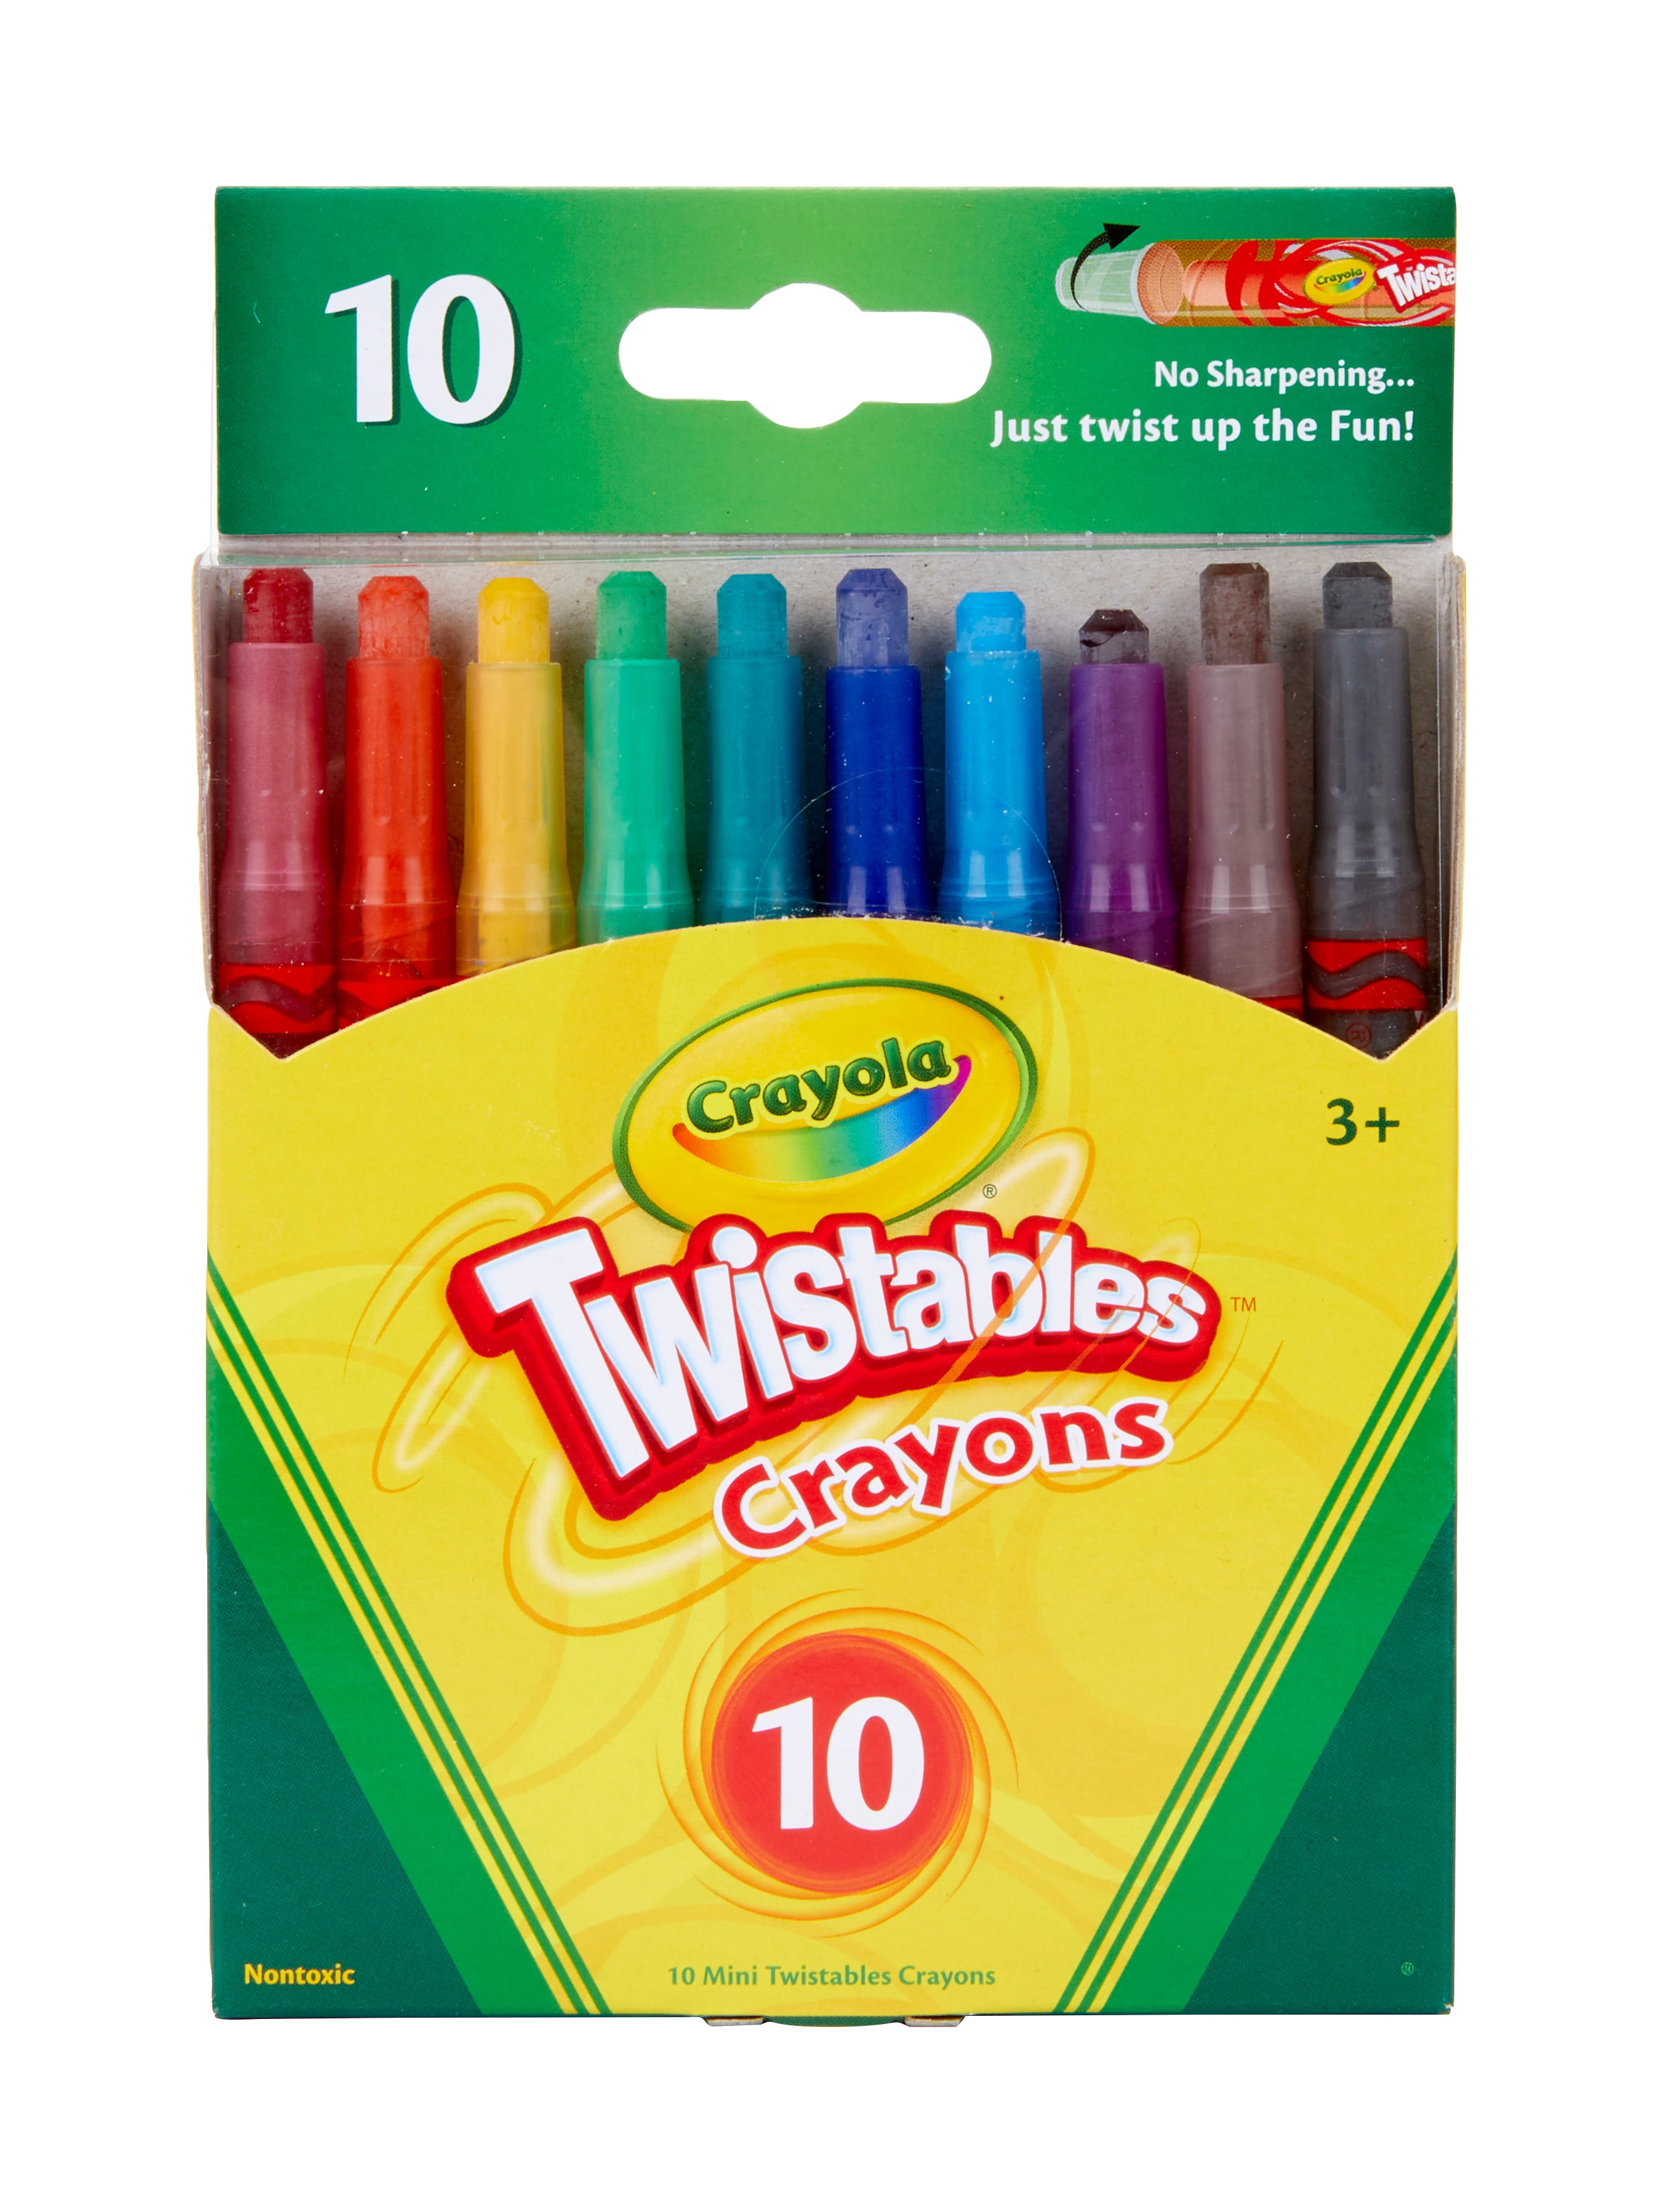 Self-Sharpening No-Mess Twist-Up Crayons Great for Kids Classrooms or Preschools Crayola Mini Twistables Crayons 10 Classic Colors Non-Toxic Art Tools for Kids & Toddlers 3 & Up 